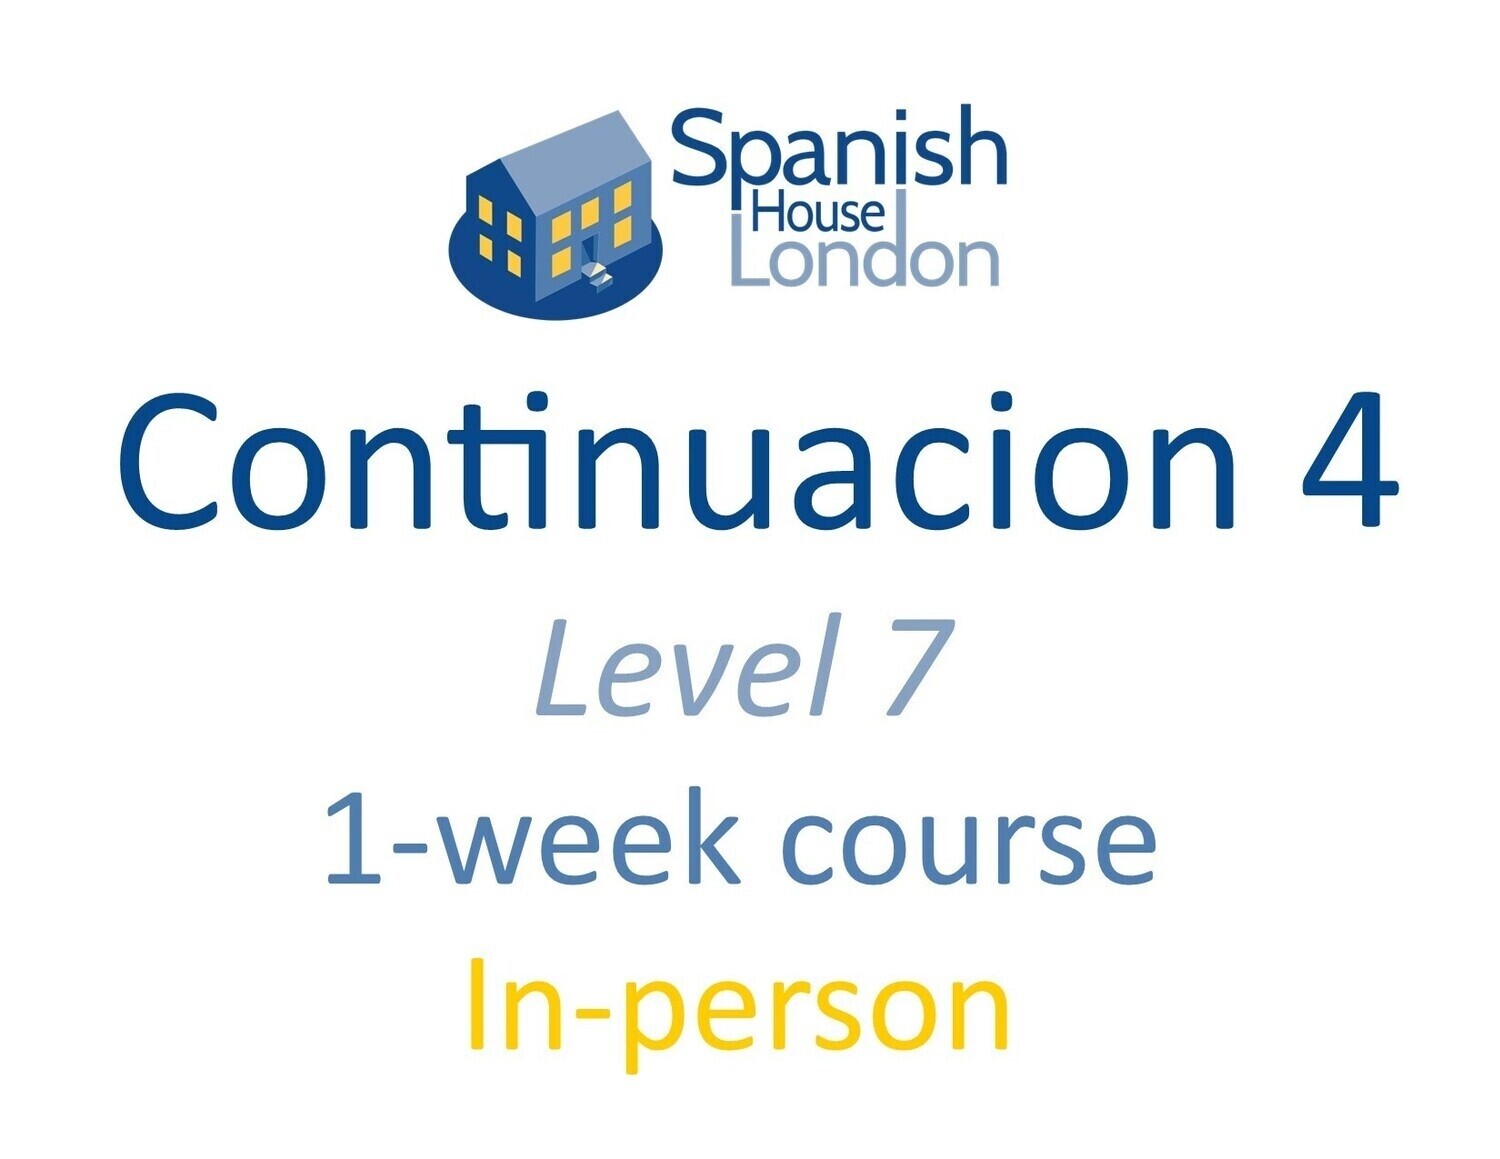 One-Week Intensive Continuación 4 Course starting on 22nd April at 10.30am in Clapham North